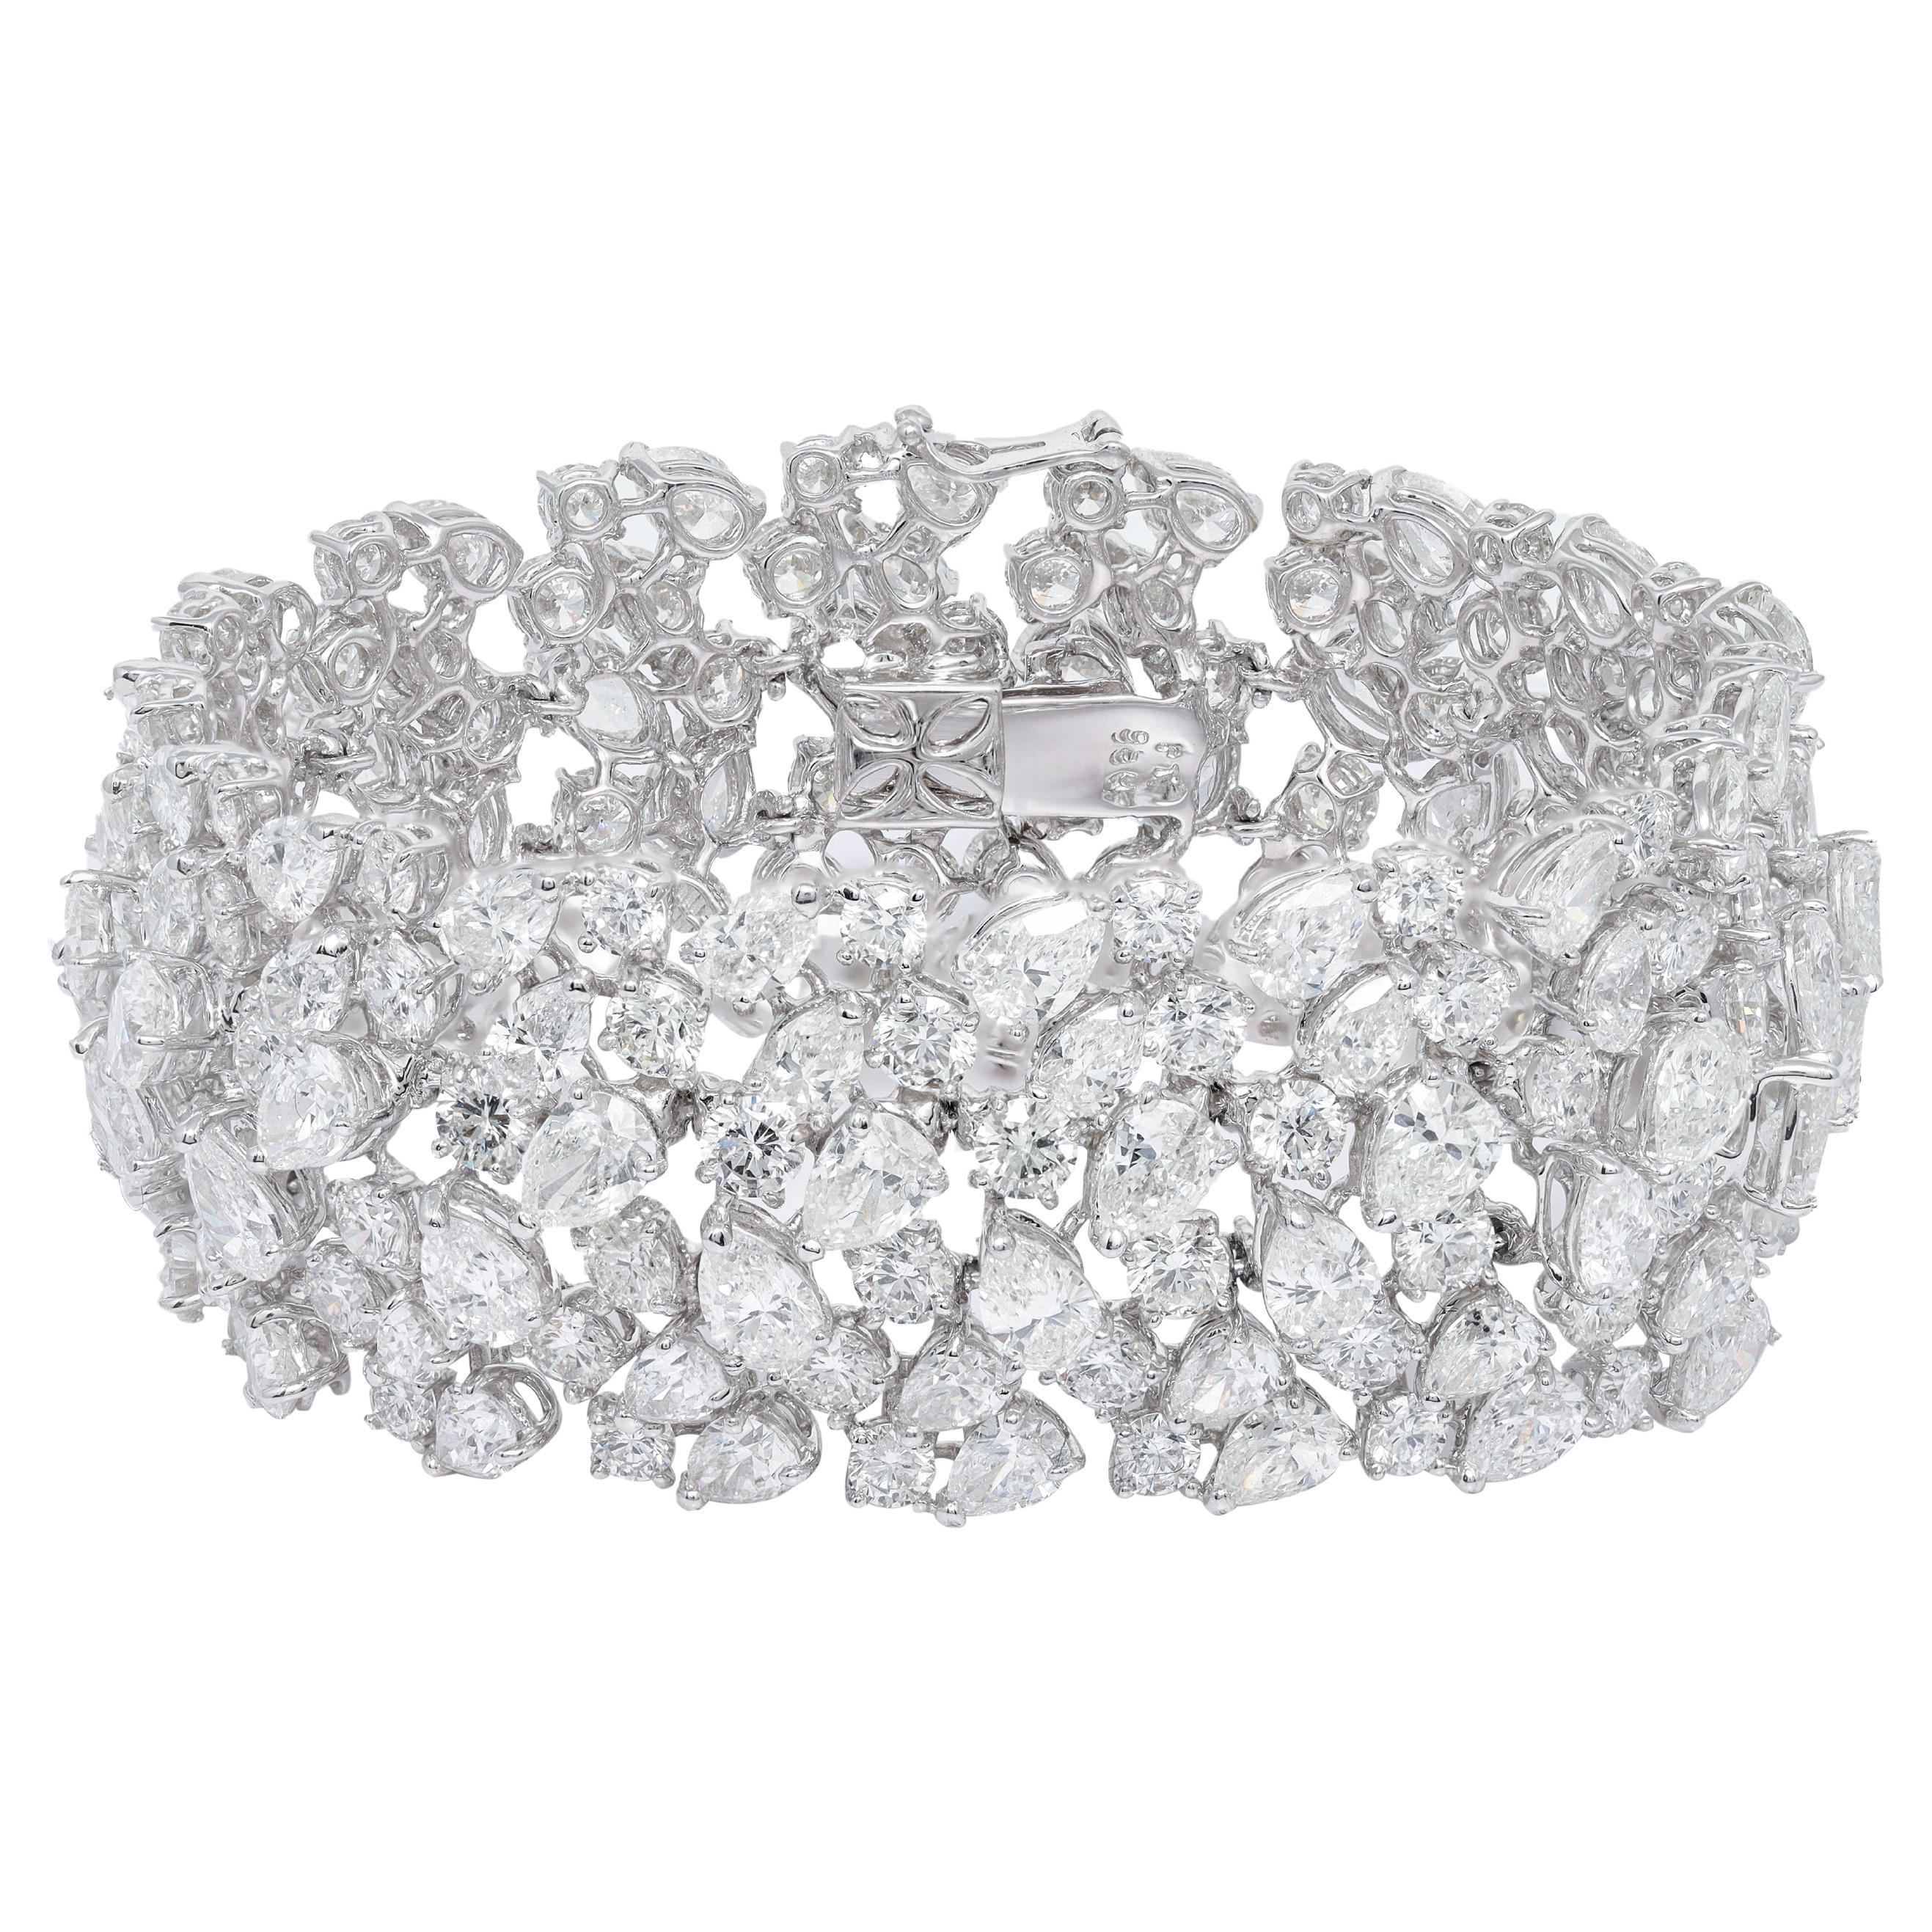 Diana M. Platinum diamond fashion bracelet featuring clusters of 52.00 cts pear  For Sale